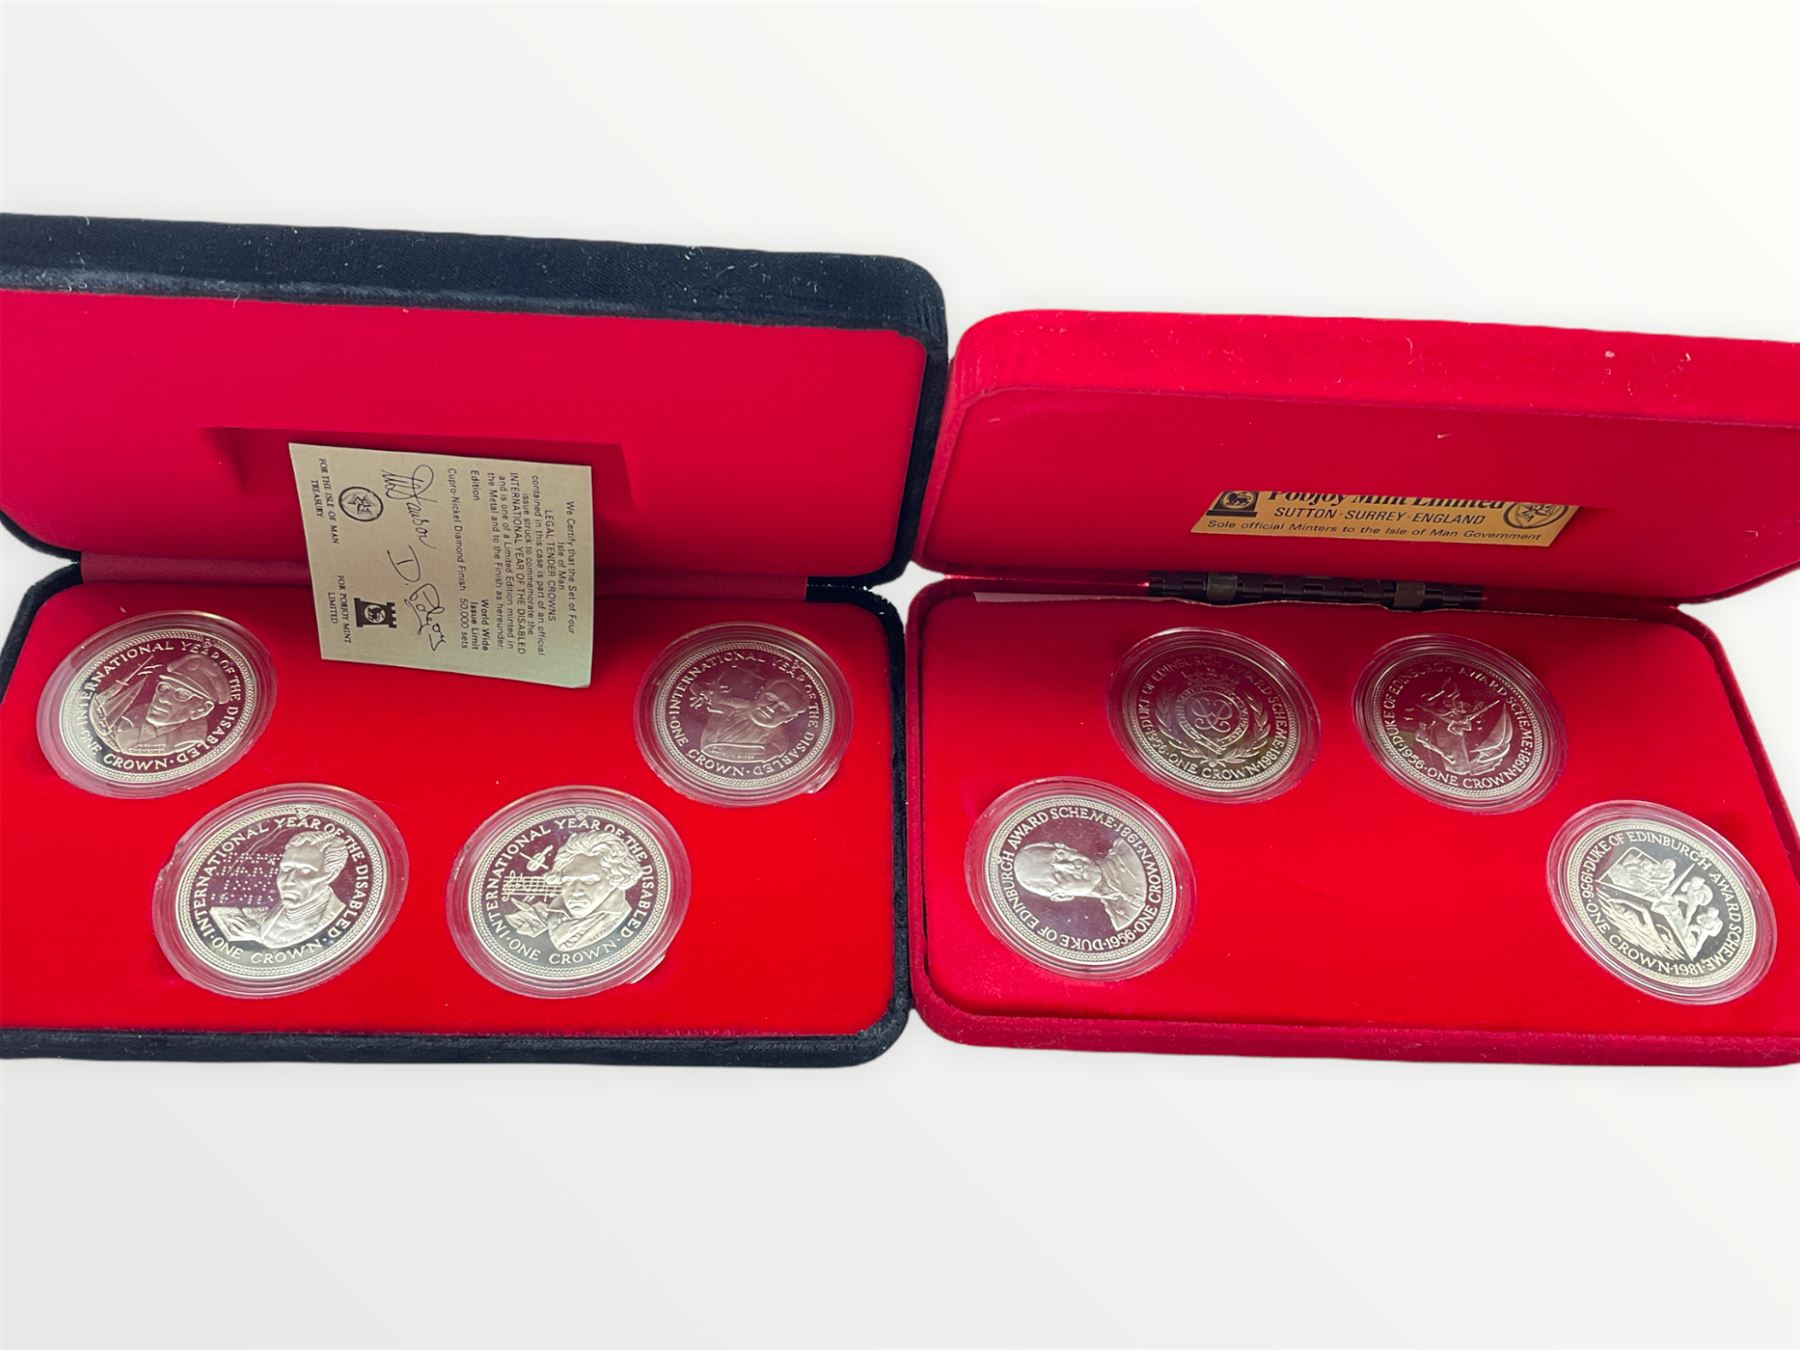 Isle of Man 1976 sterling silver coin set - Image 2 of 2